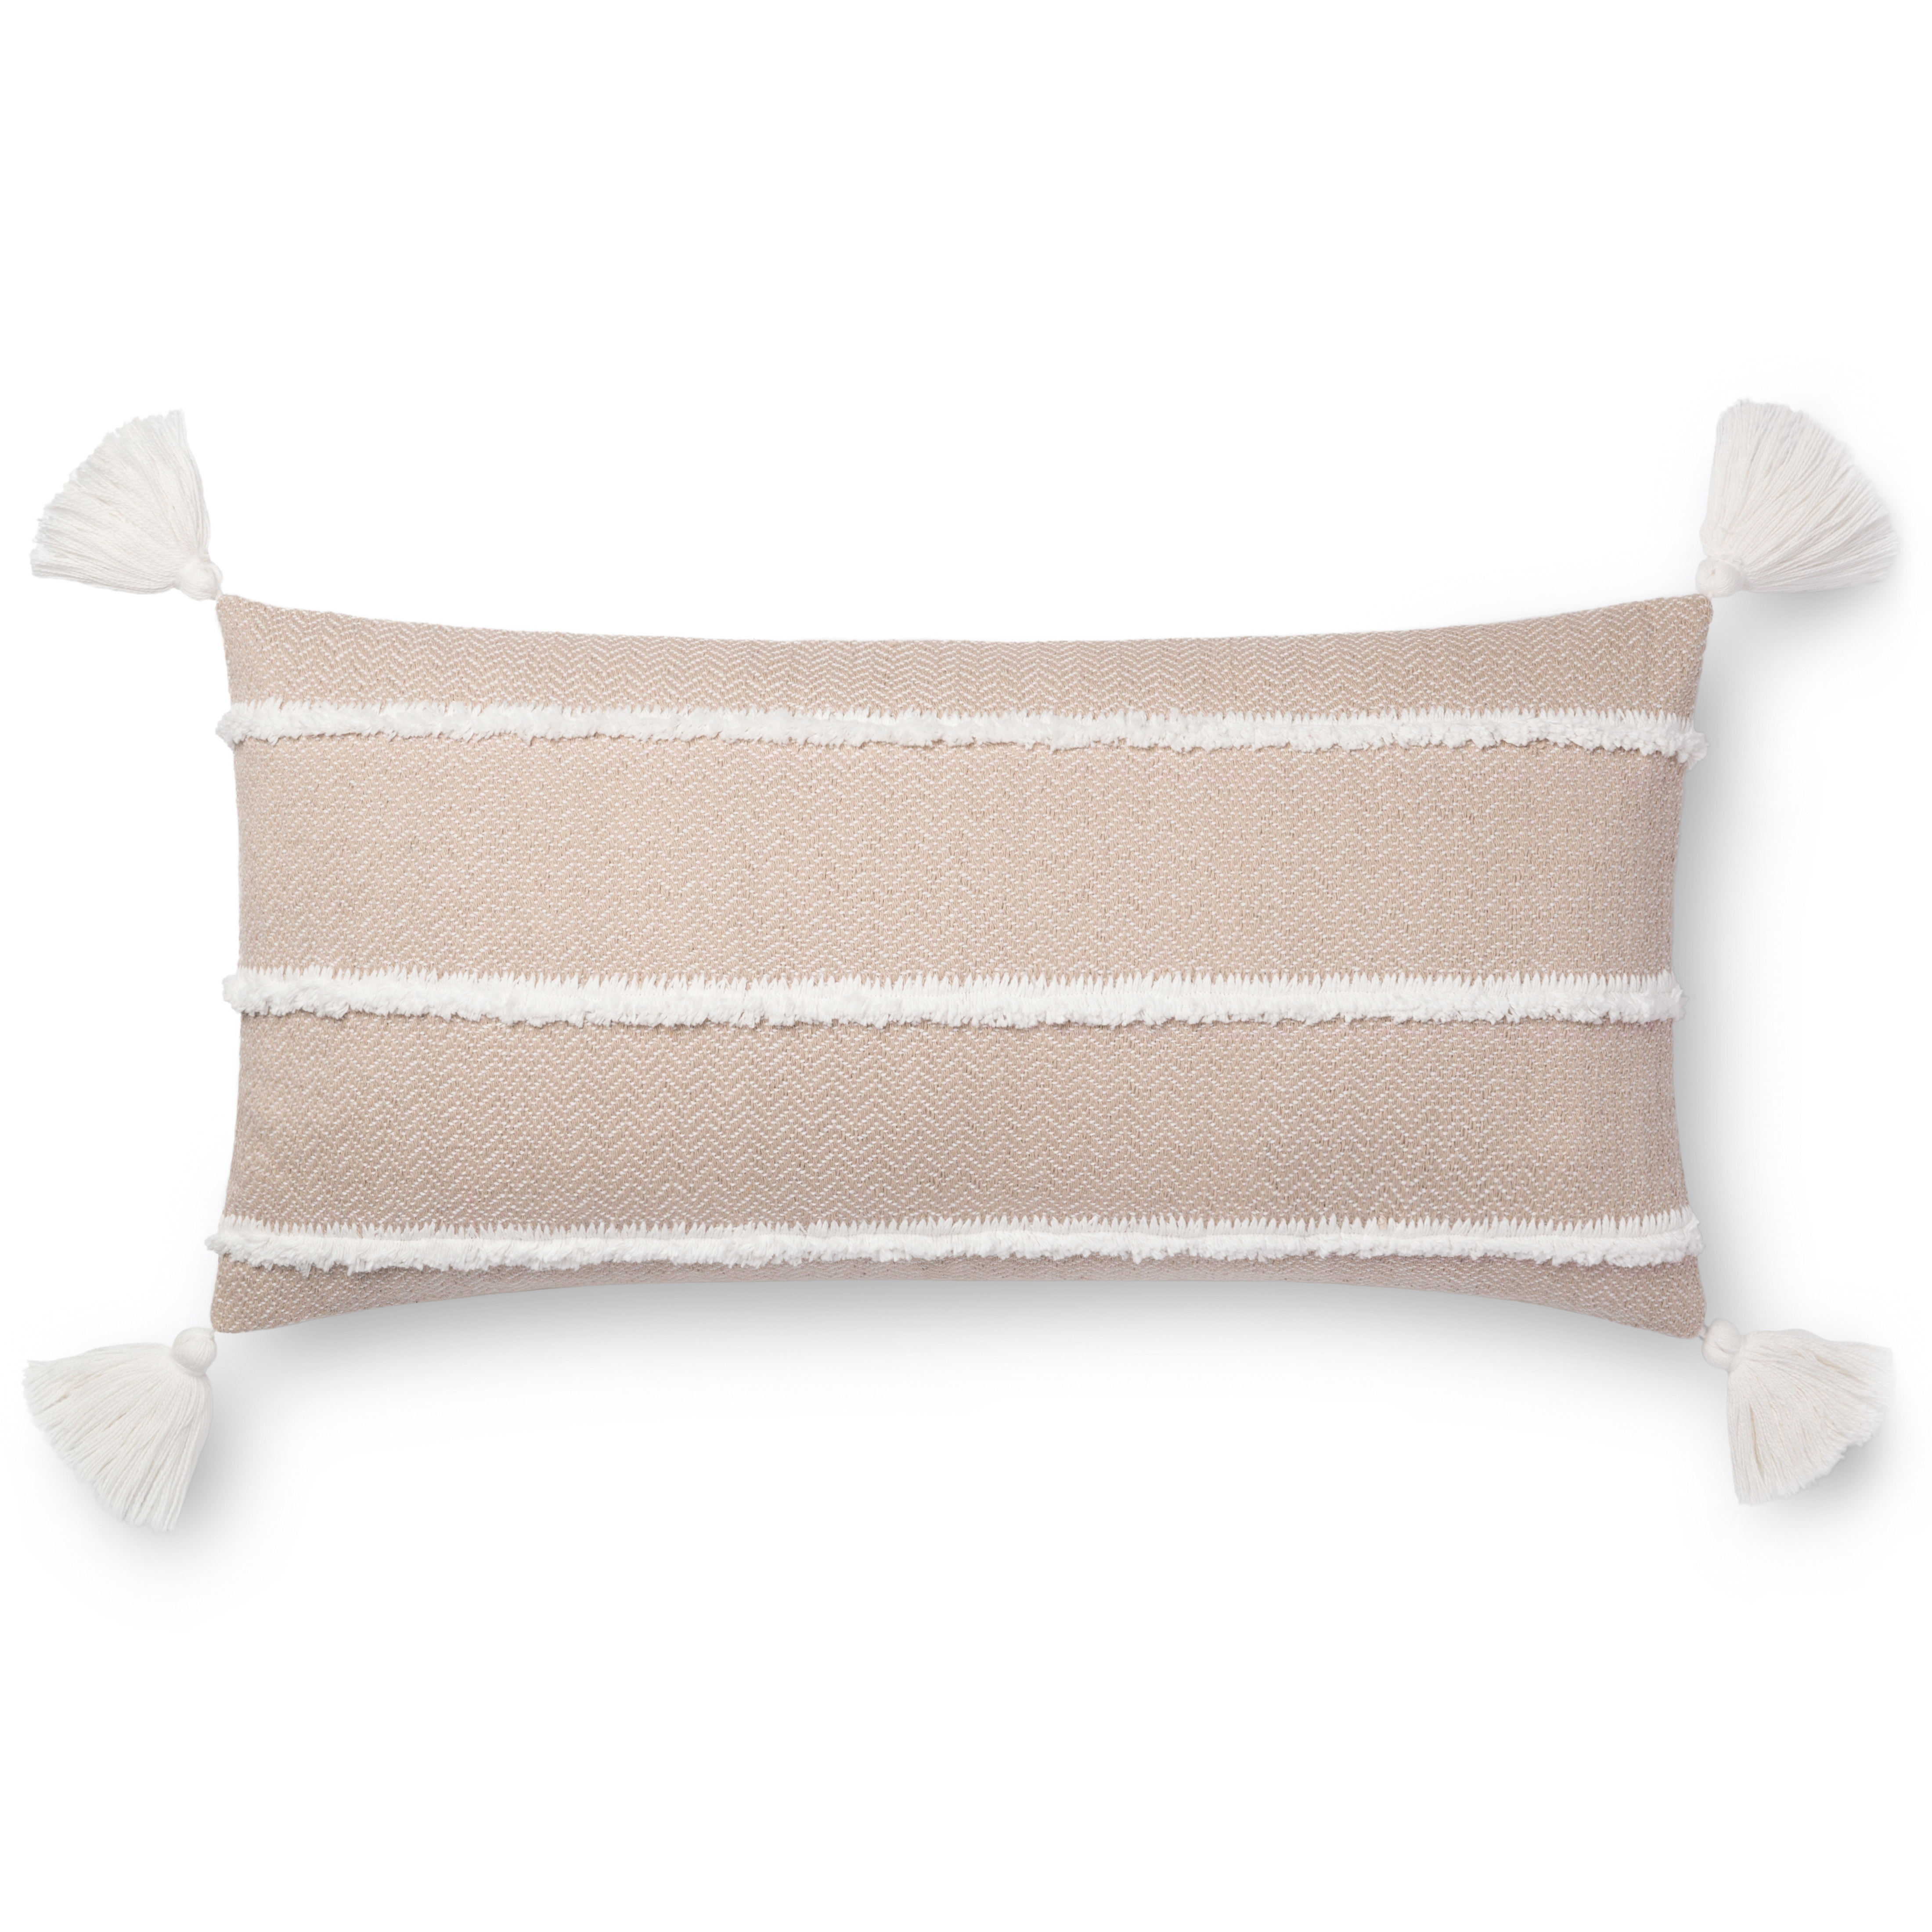 Magnolia Home by Joanna Gaines x Loloi Pillows P1091 Beige 12" x 27" Cover Only - Image 0